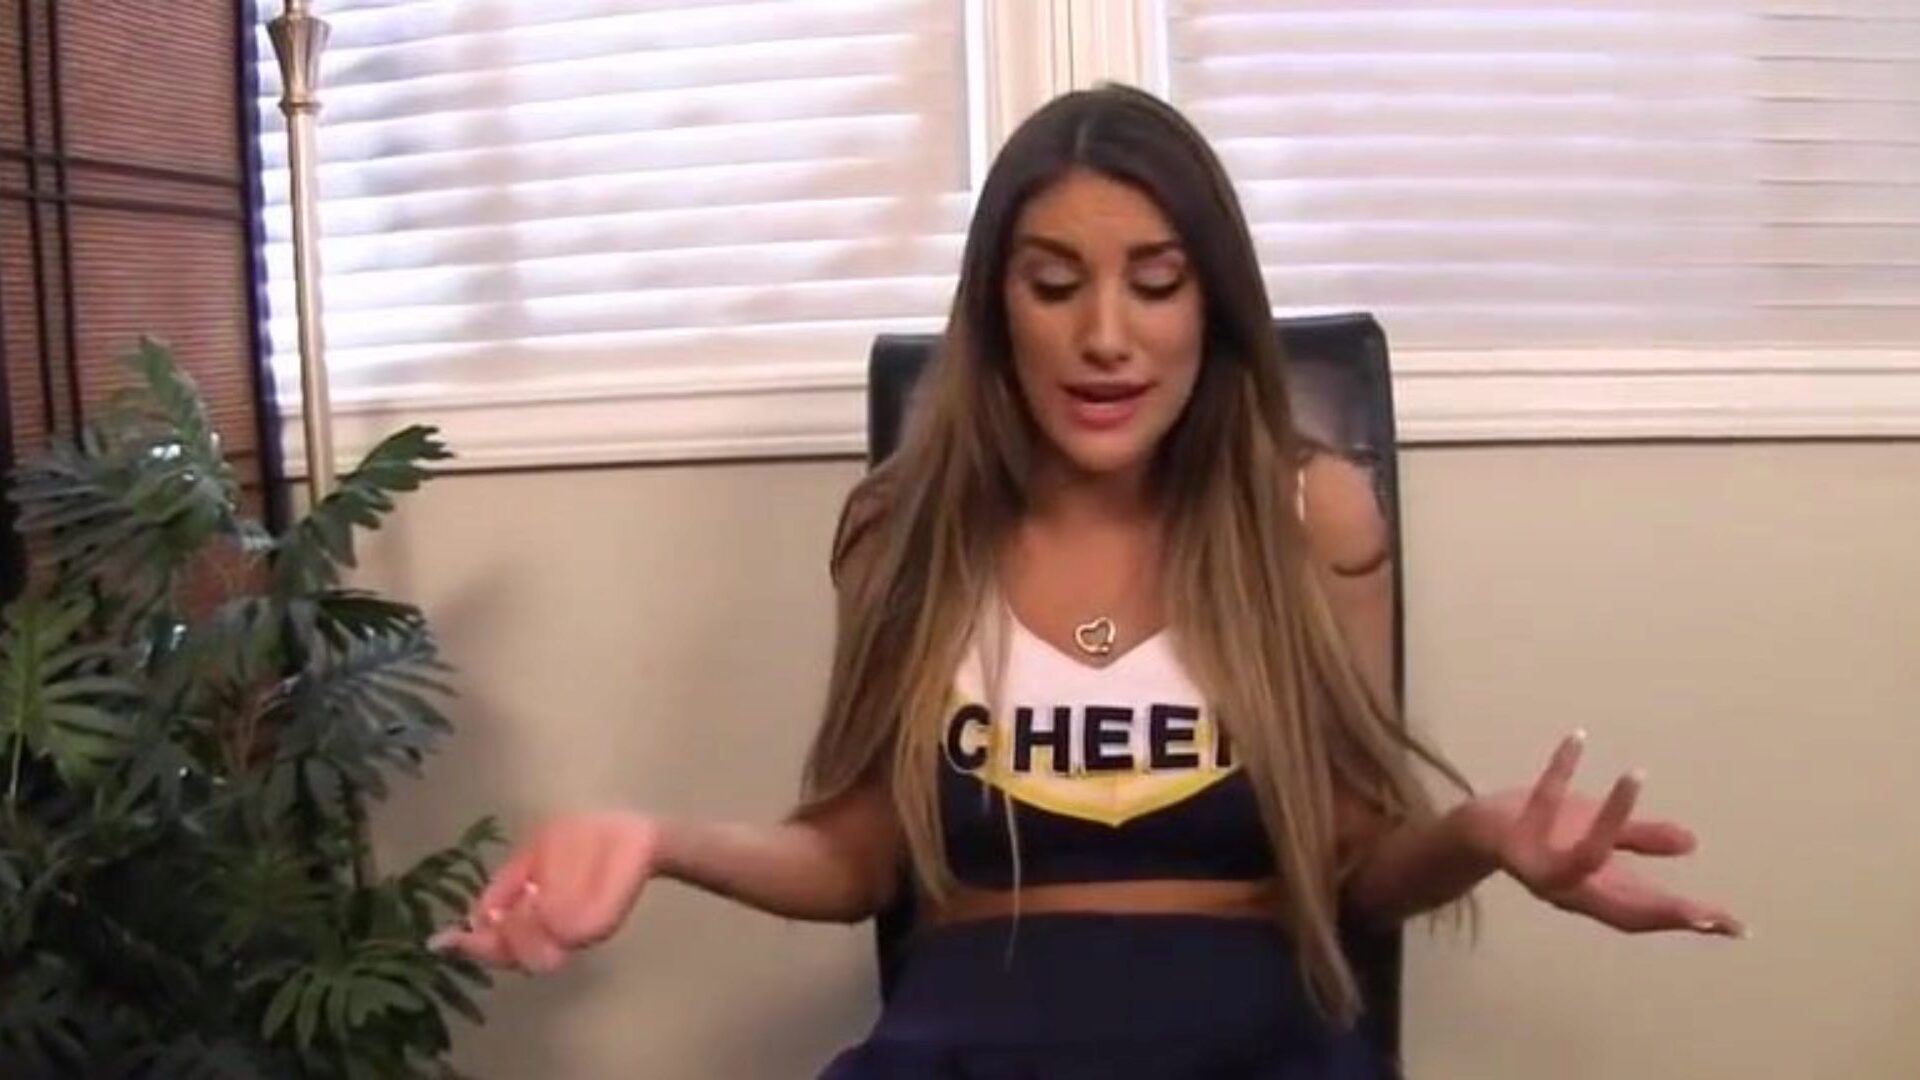 Hot Cheerleader With Biggest Mambos Does HAWT Jerk Off Instructions To Stay On The Team - August Ames